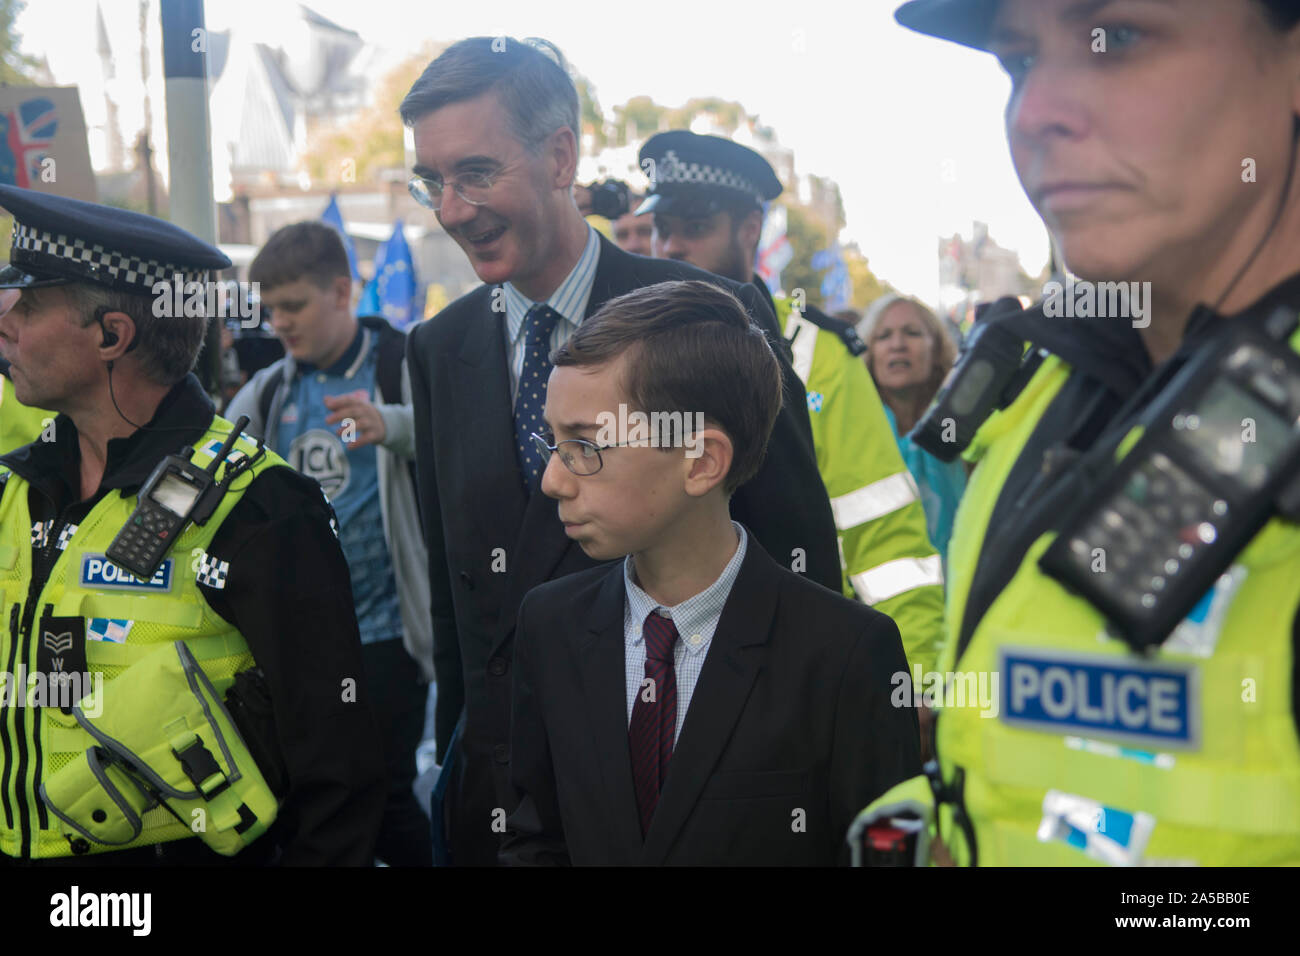 Peter Rees-Mogg son of Jacob Rees-Mogg MP need police protection when they leave the House of Commons after the Brexit debate on Super Saturday 19th October 2019. They are flanked by a group of police while protesters shout verbal  abuse and threaten them. London England UK  2010s  HOMER SYKES Stock Photo